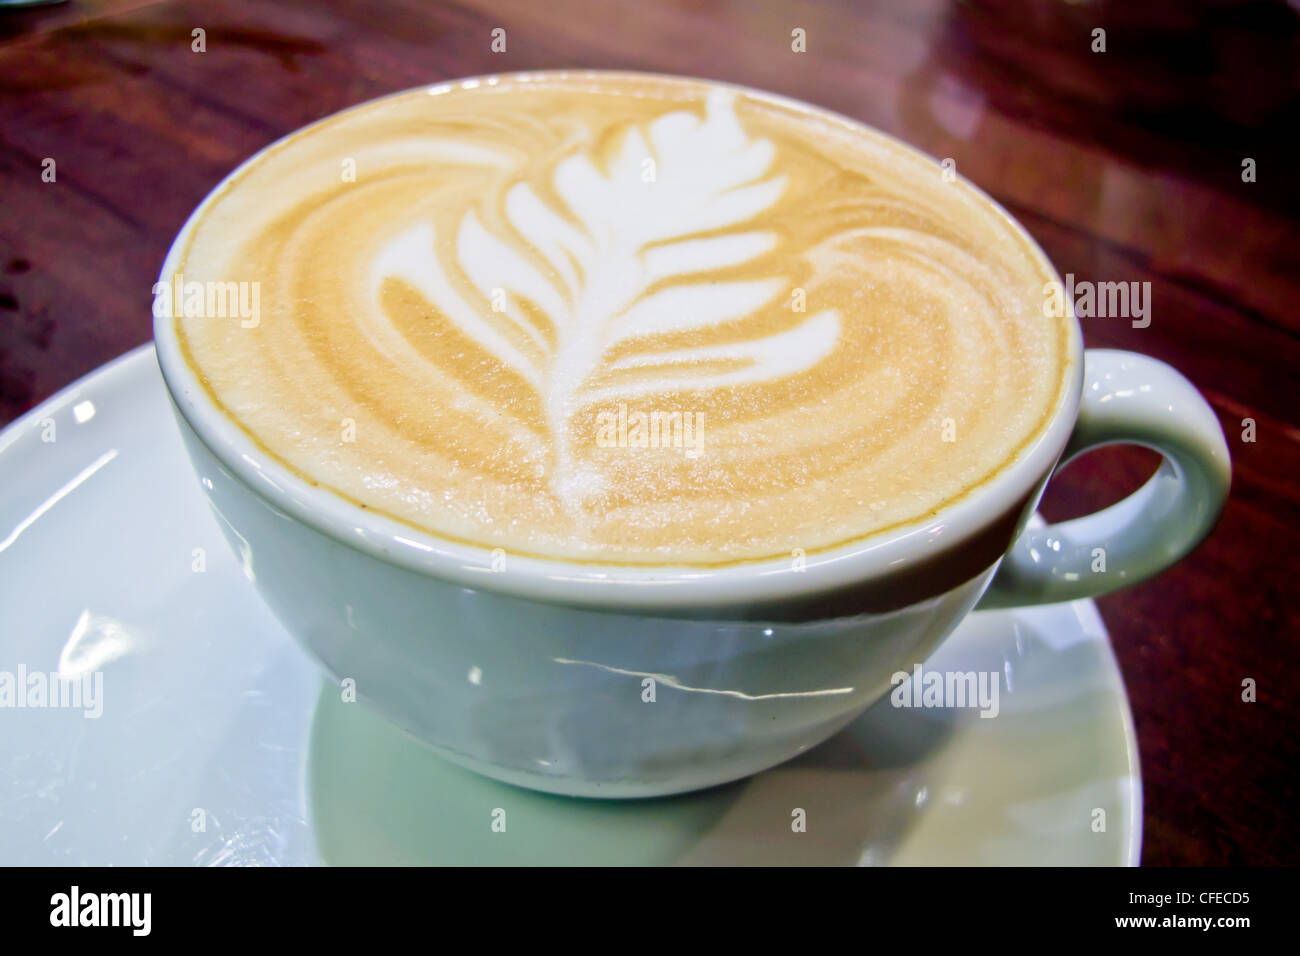 Flat White coffee with a leaf pattern on the top Stock Photo